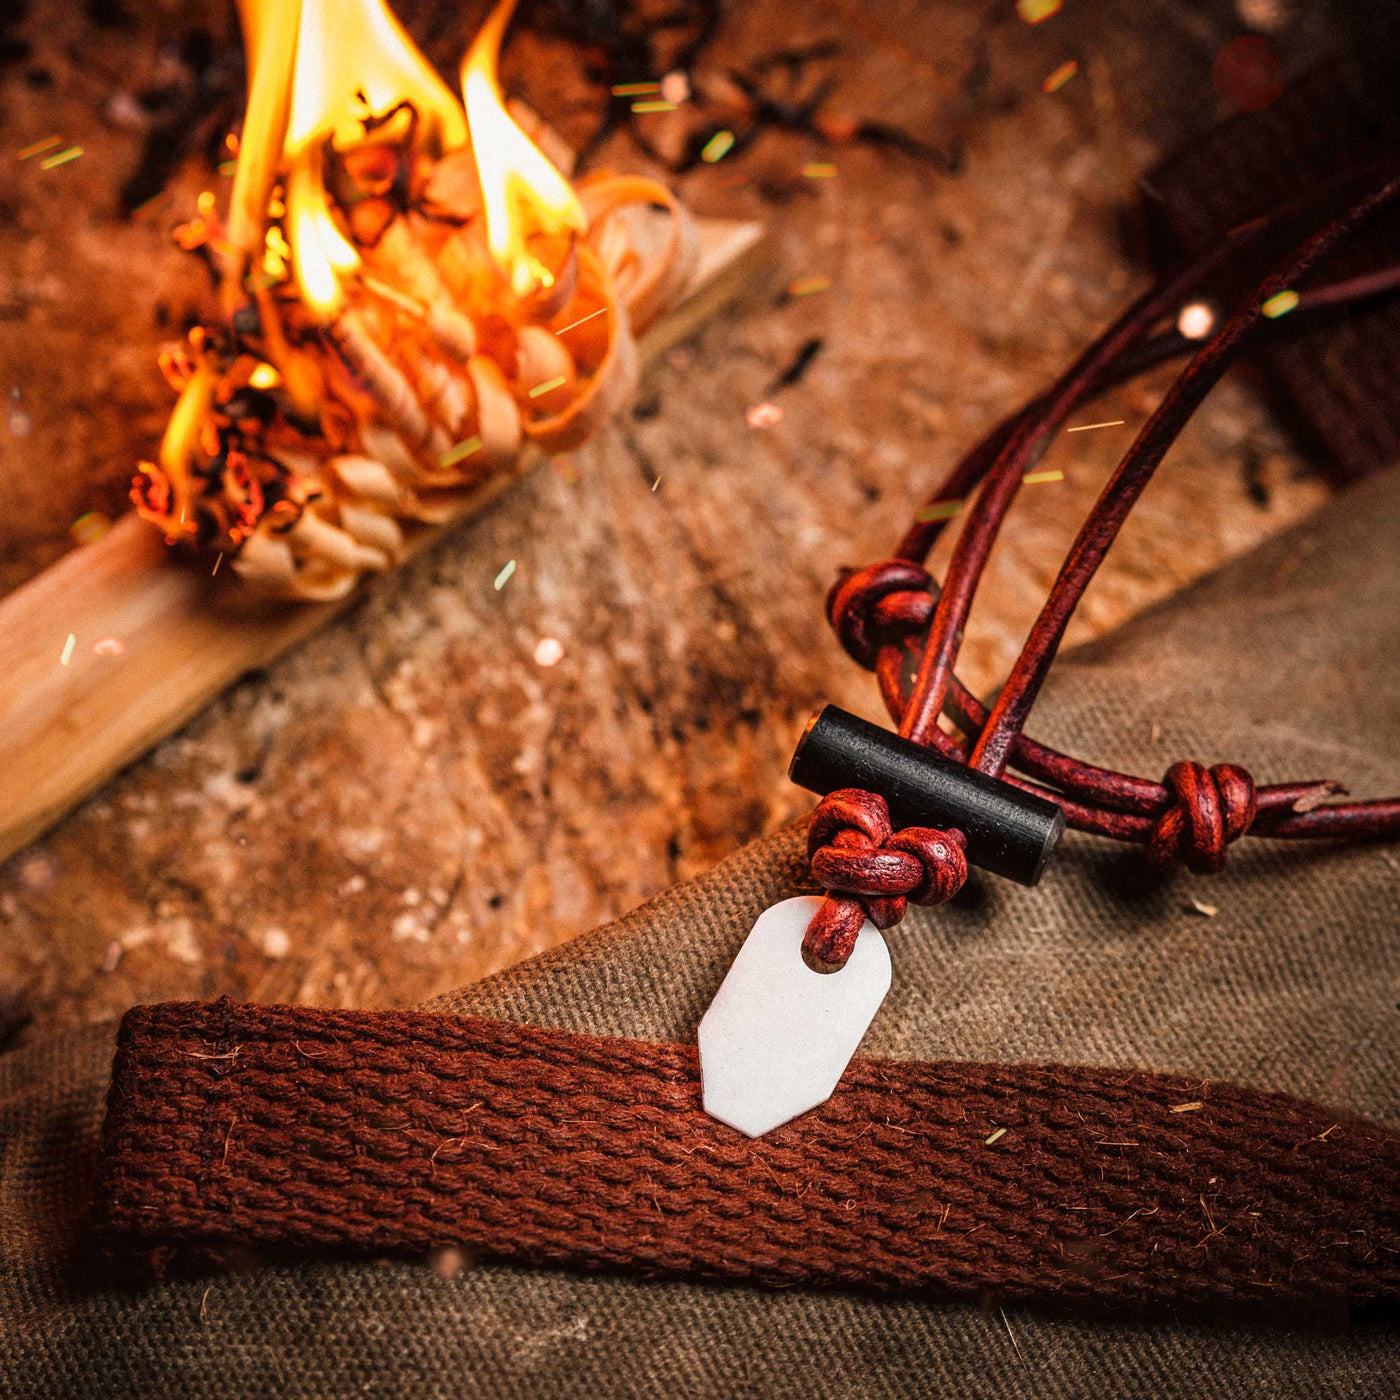 Fire glow lighting on the Bushcraft necklace with white ceramic by Wazoo